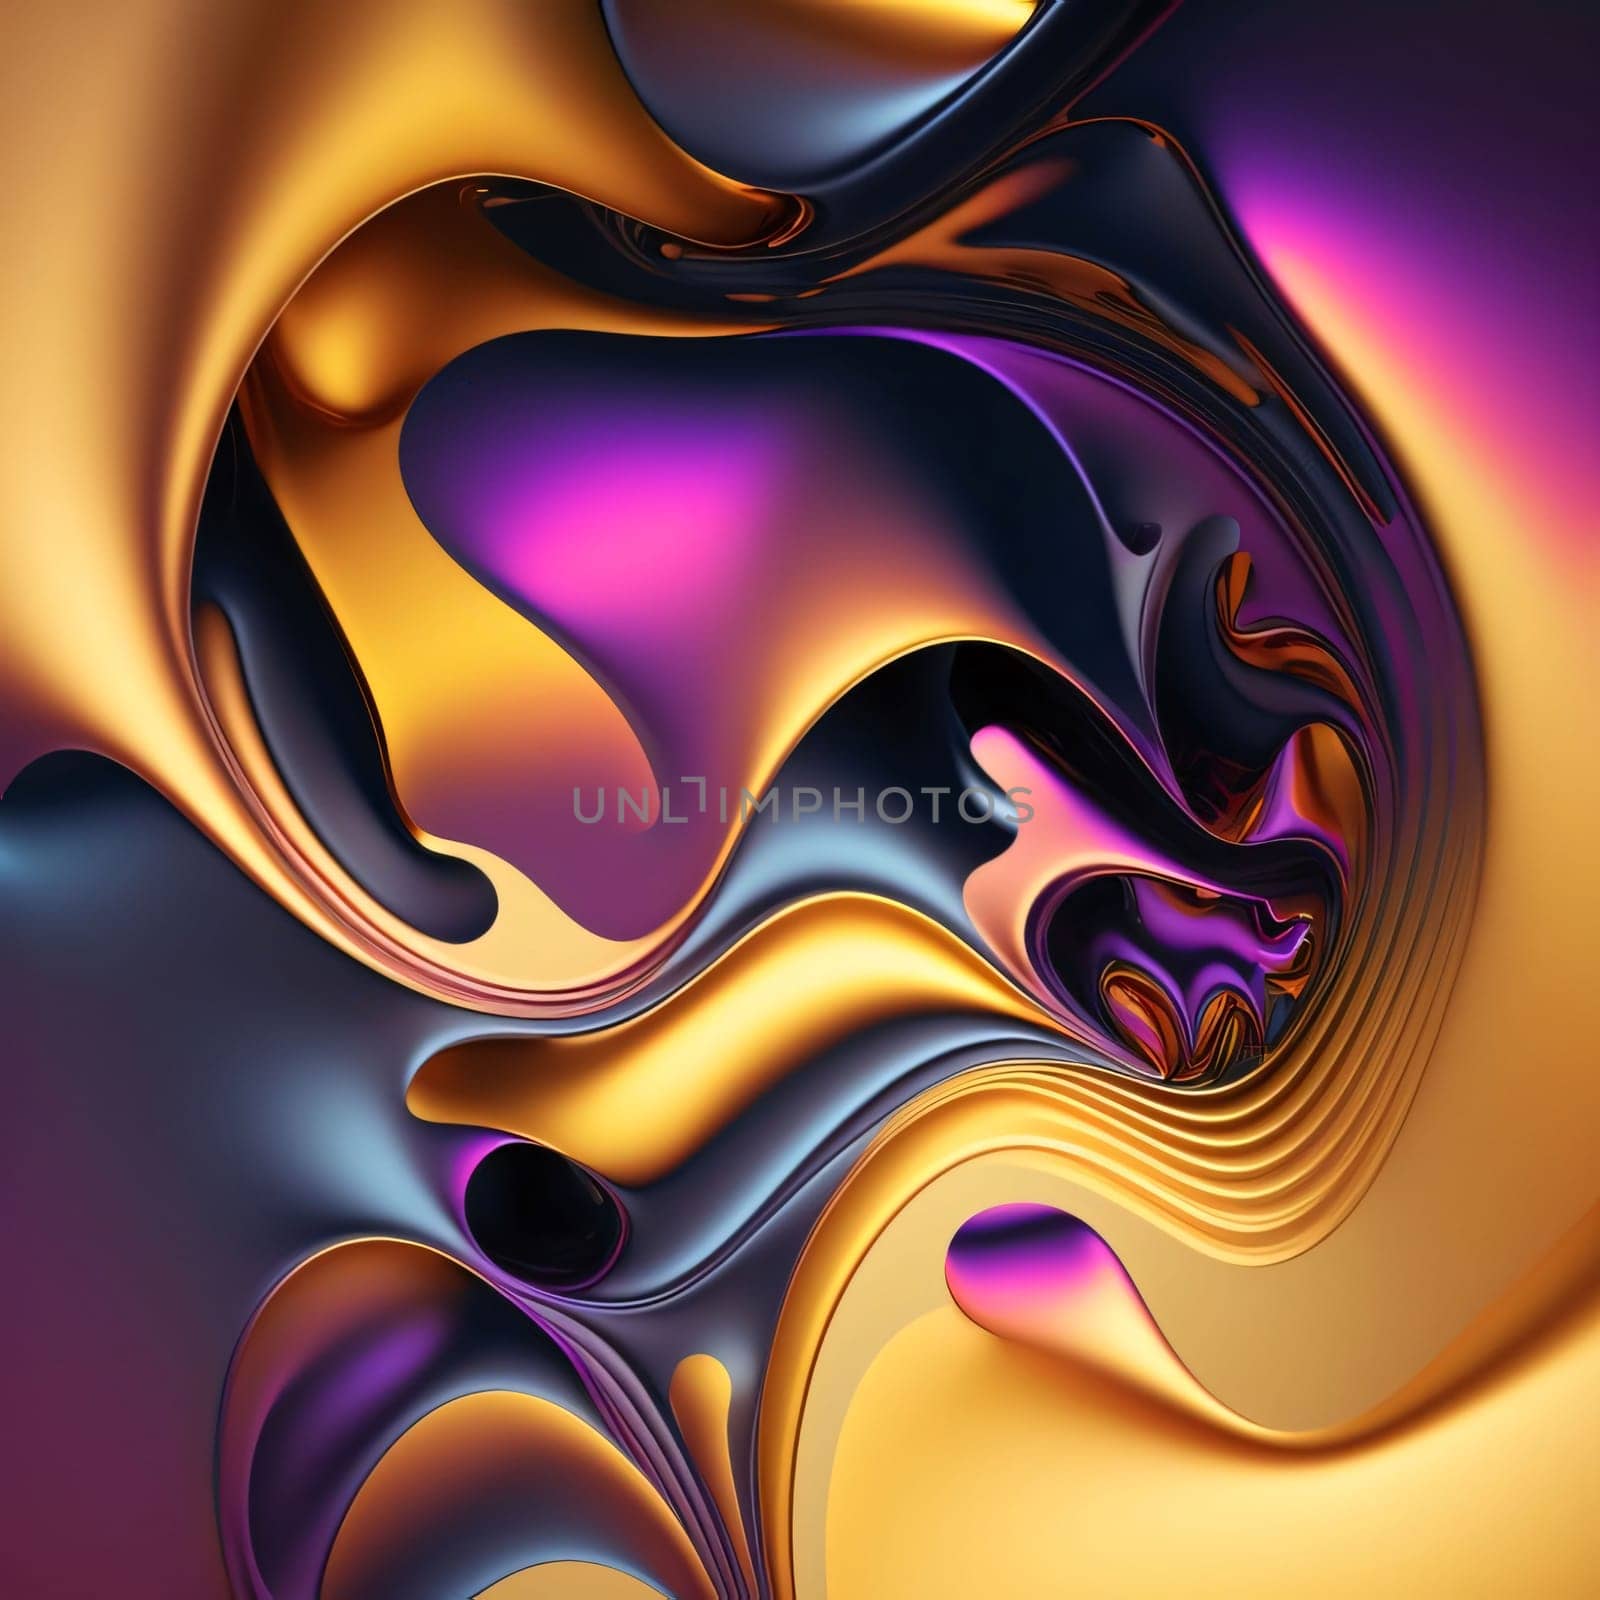 Abstract background design: abstract background with smooth lines in purple, yellow and purple colors